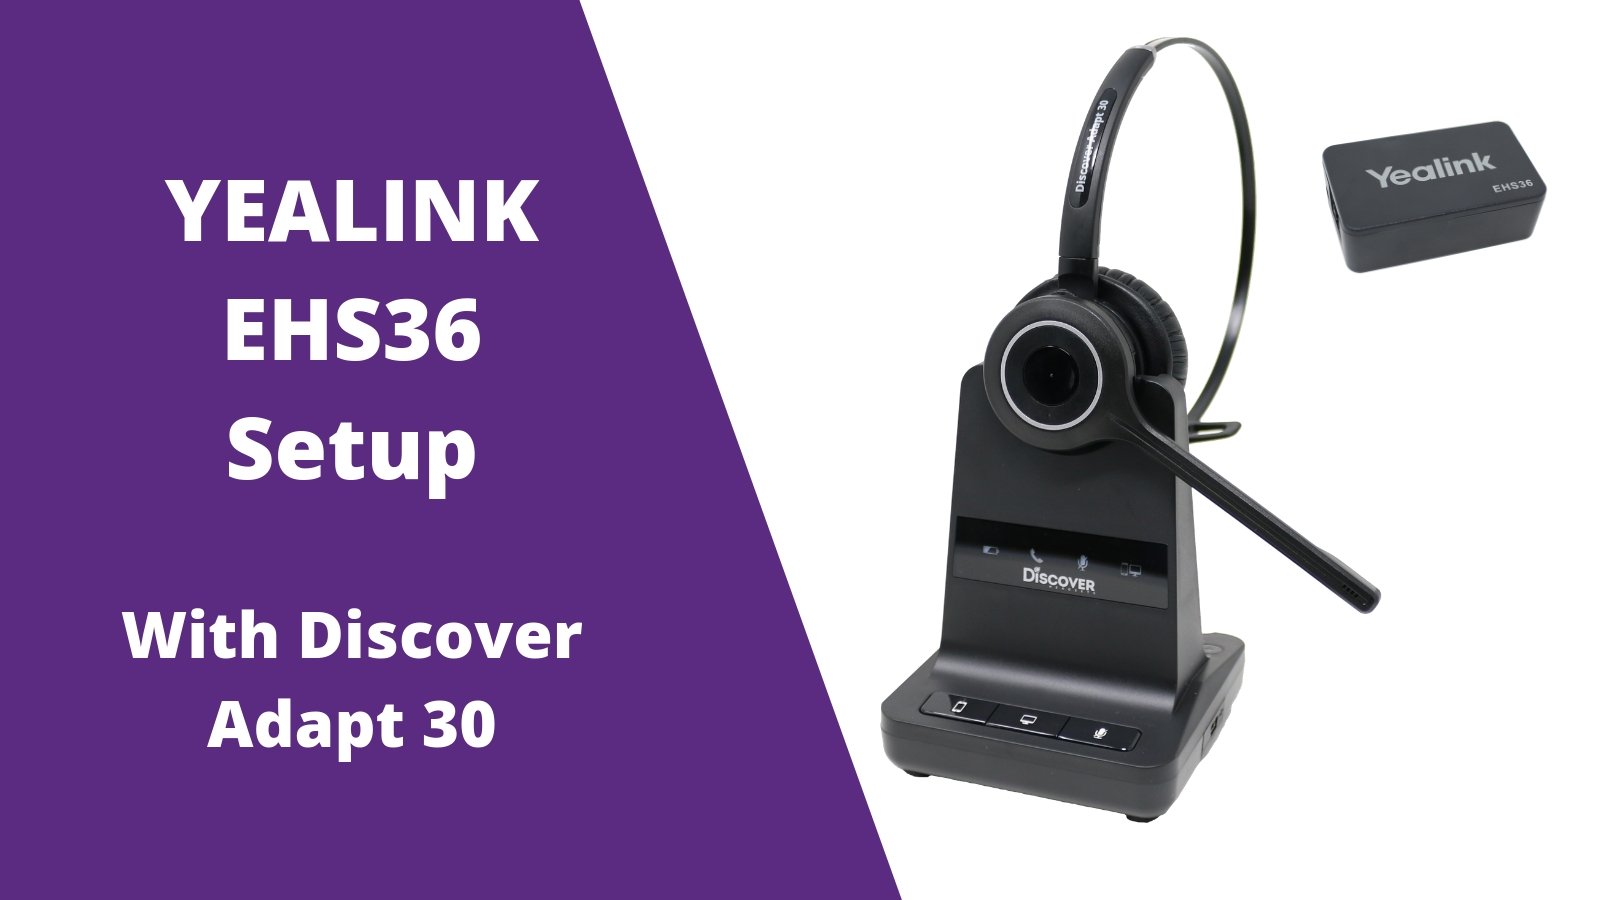 Yealink EHS36 Setup Guide With Discover Adapt 30 Wireless Headset - Headset Advisor